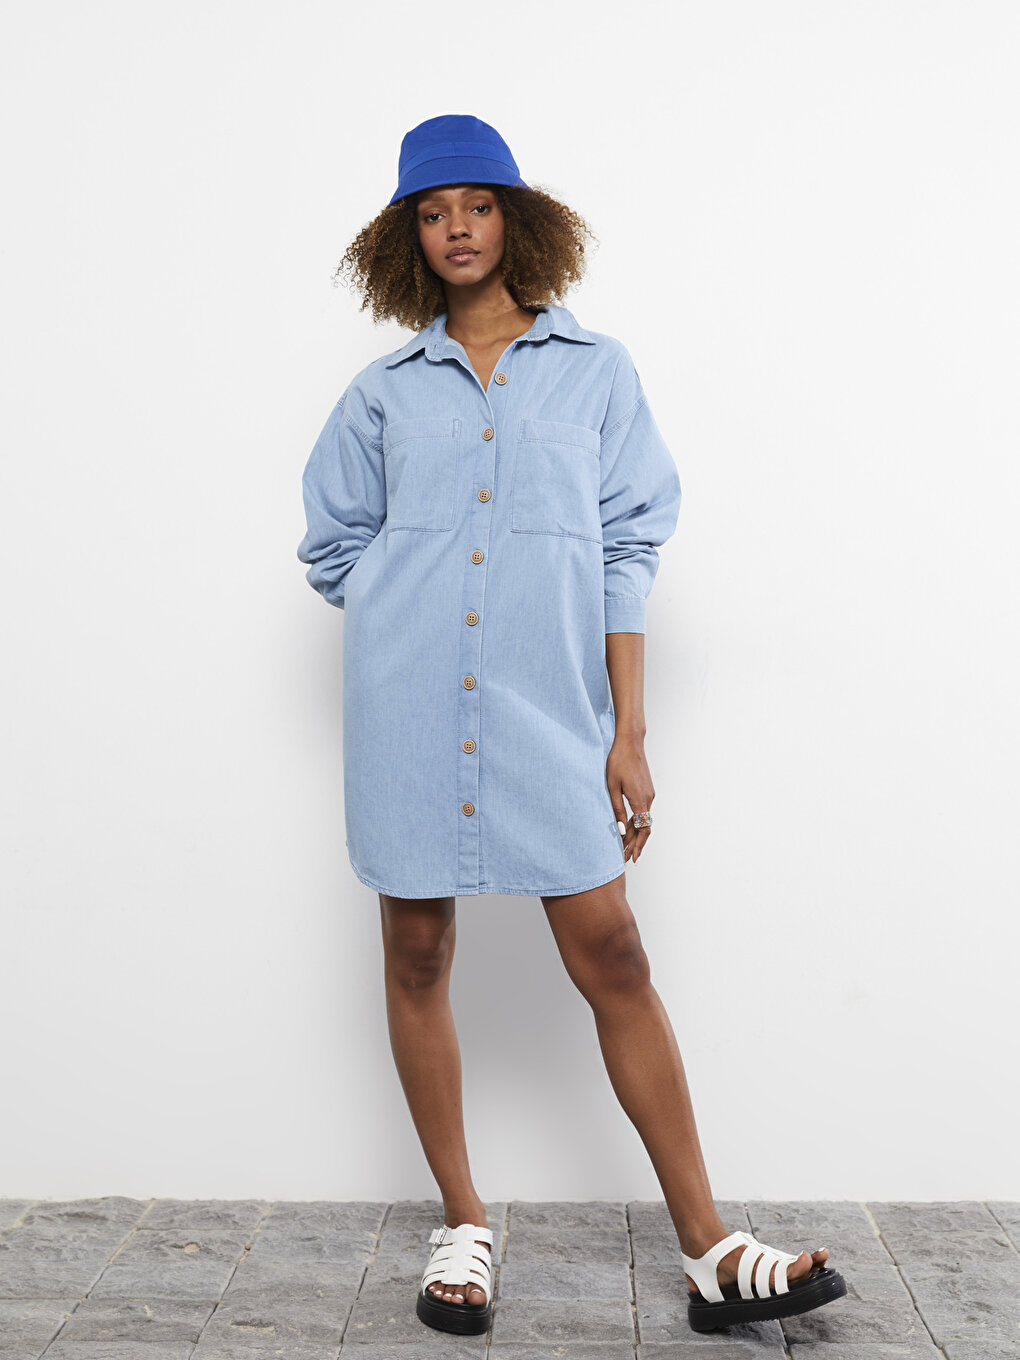 Buy Women Casual Denim Shirt Dresses Top Long Sleeve Button-Down Distressed Jean  Dress (Blue, XXL) at Amazon.in